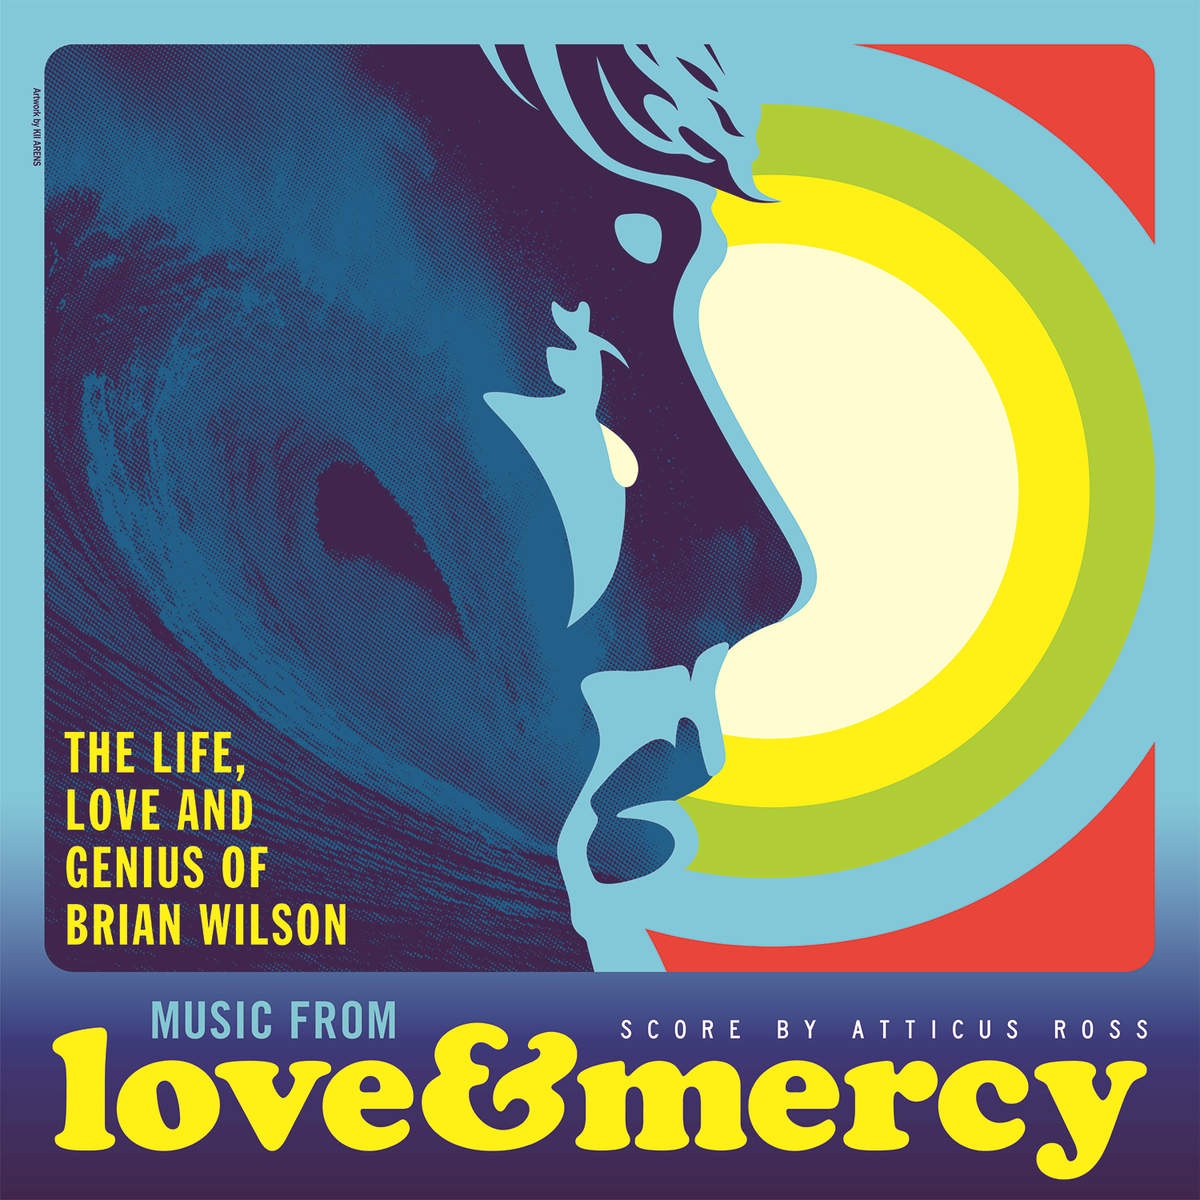 Losing It - From “Love & Mercy – The Life, Love And Genius Of Brian Wilson” Soundtrack